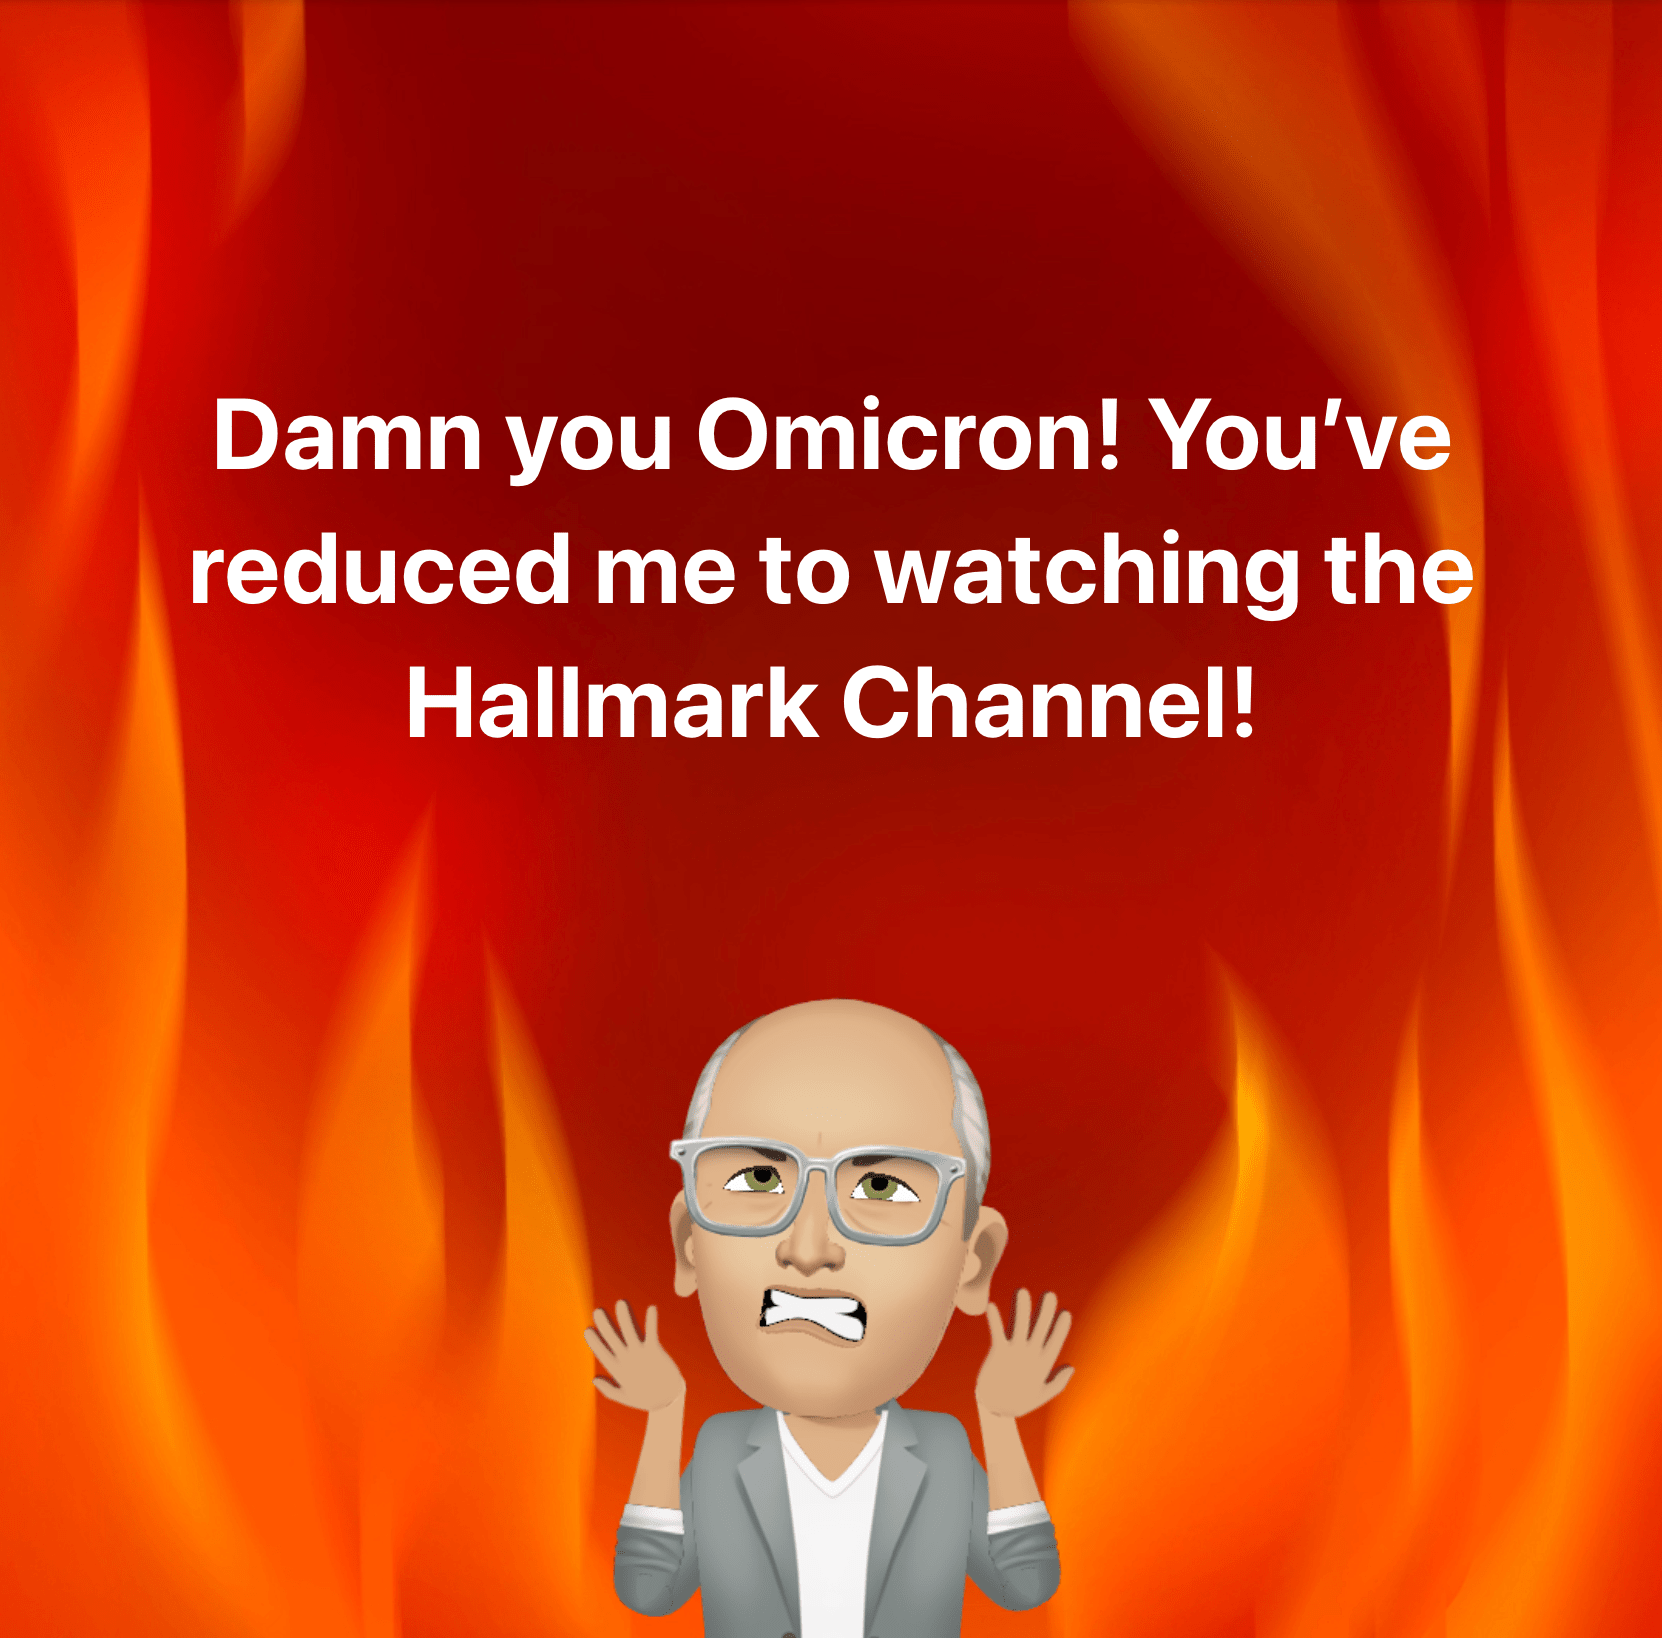 Damn you Omicron! You've reduced me to watching the Hallmark Channel!